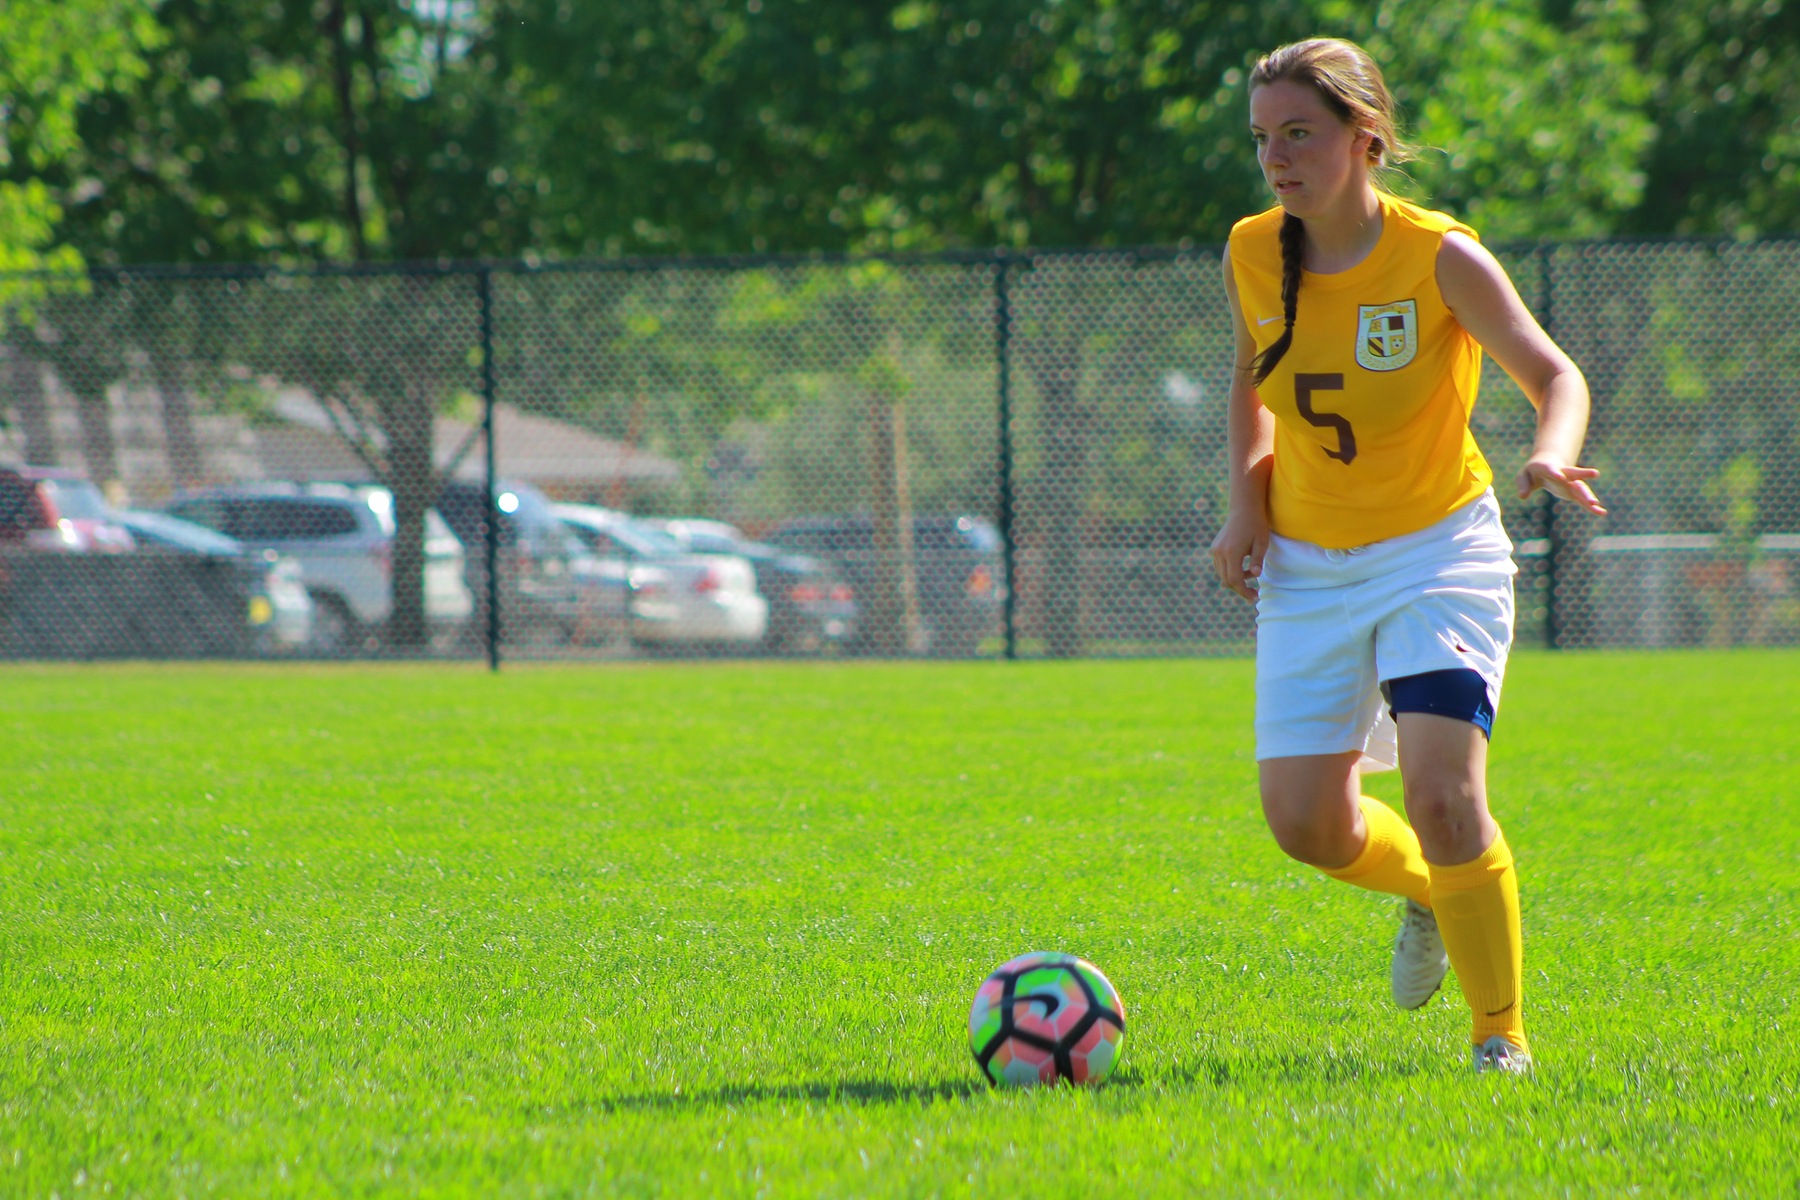 Molleigh Adams-Freund scored the only goal of the game for the Eagles in a 2-1 loss at Bethany Lutheran